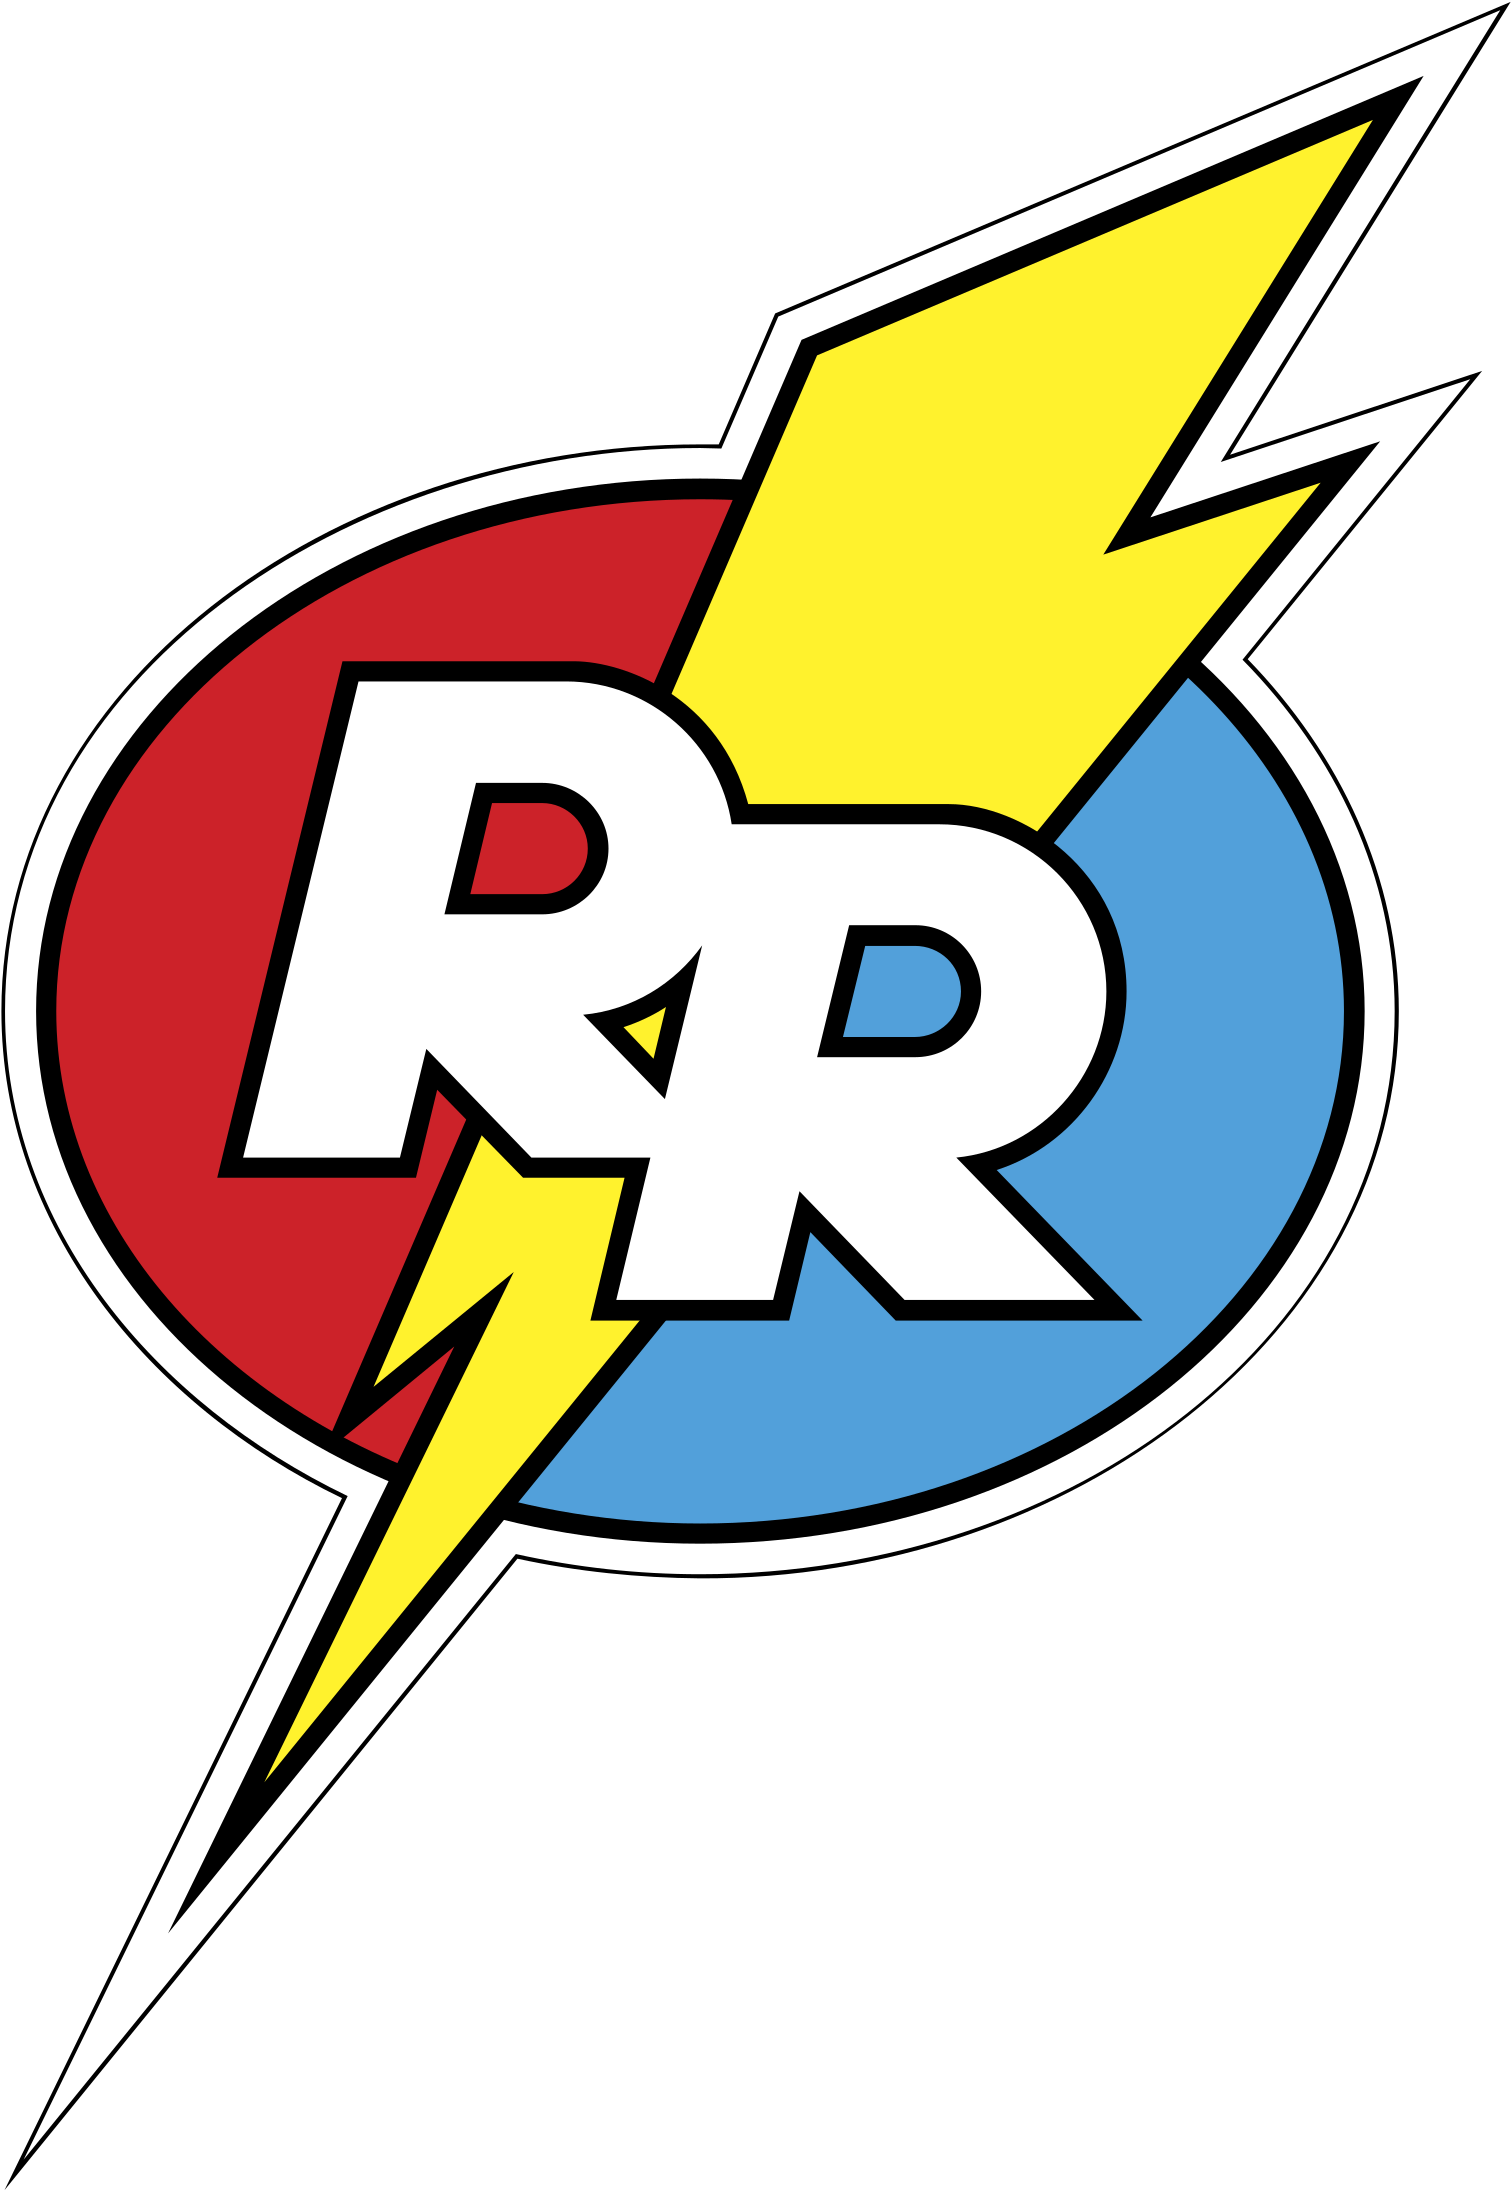 Chip'n Dale Rescue Rangers Logo Png Transparent - Chip 'n Dale Rescue Rangers (2400x2400)